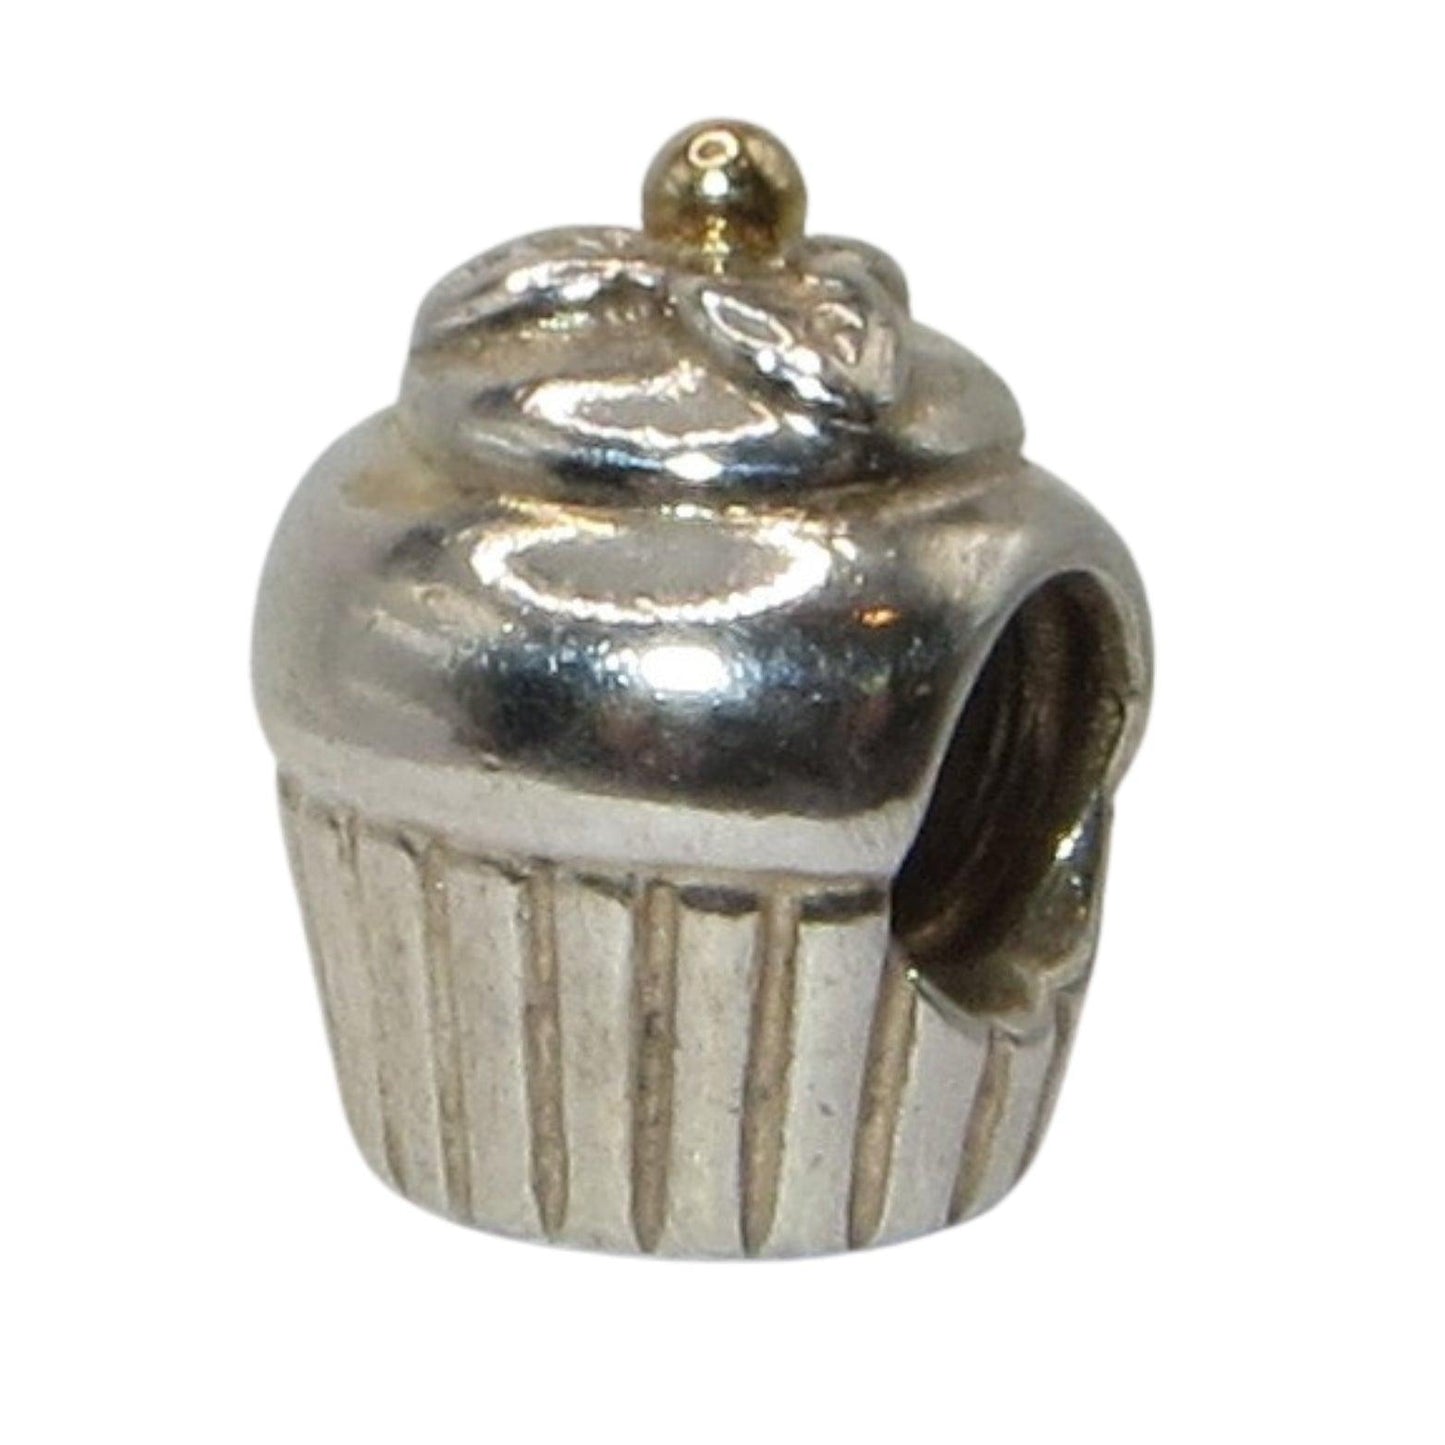 PANDORA 790417 Cup Cake - Sterling Silver Cup Cake with 14k Gold on Top - Women's Charm - Charming Jilly